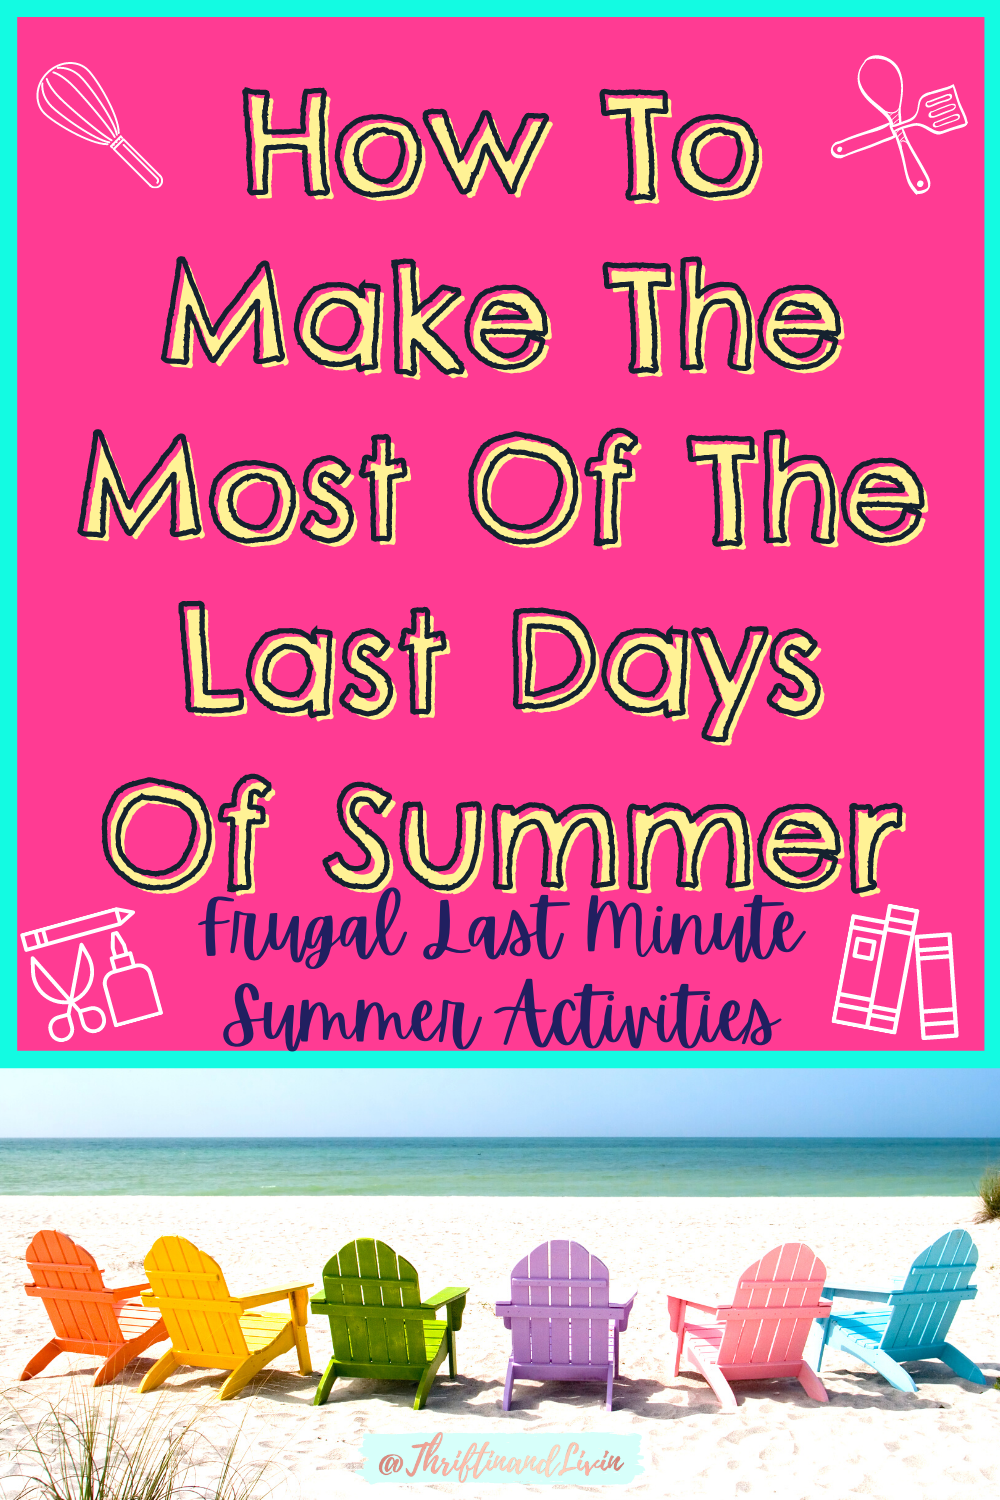 How To Make The Most of The Last Days of Summer - Frugal Last Minute Summer Activities for Kids Pinterest Pin Image